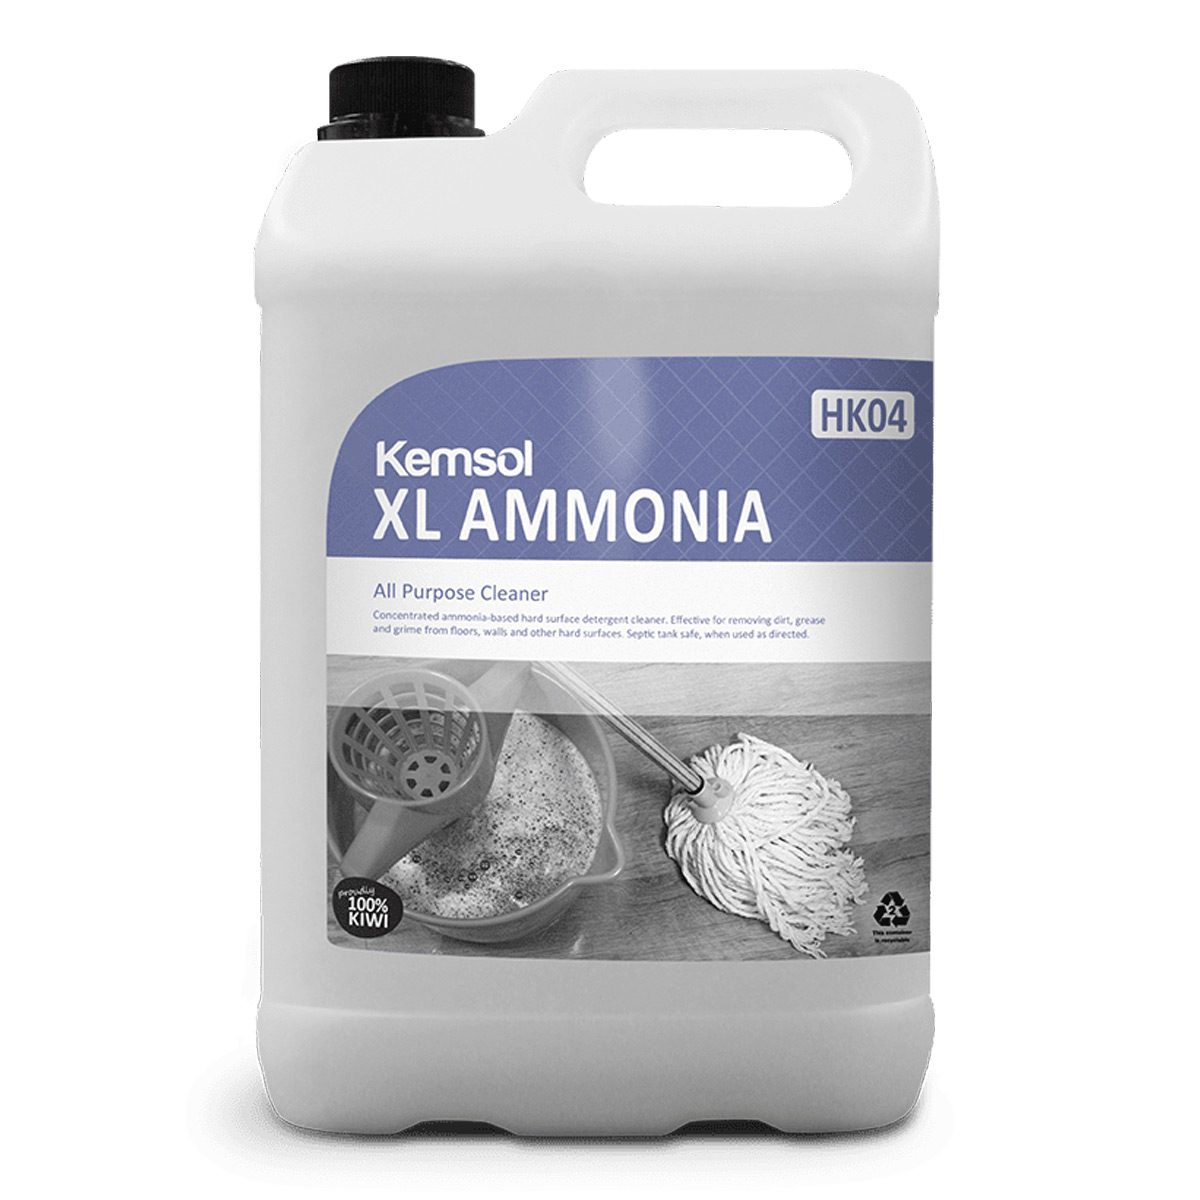 cleaning-products-kitchen-multipurpose-kemsol-xl-ammonia-5L-litre-concentrated-ammonia-based-hard-surface-detergent-cleaner-removes-dirt-grease-grime-from-floors-walls-vjs-distributors-KAMM